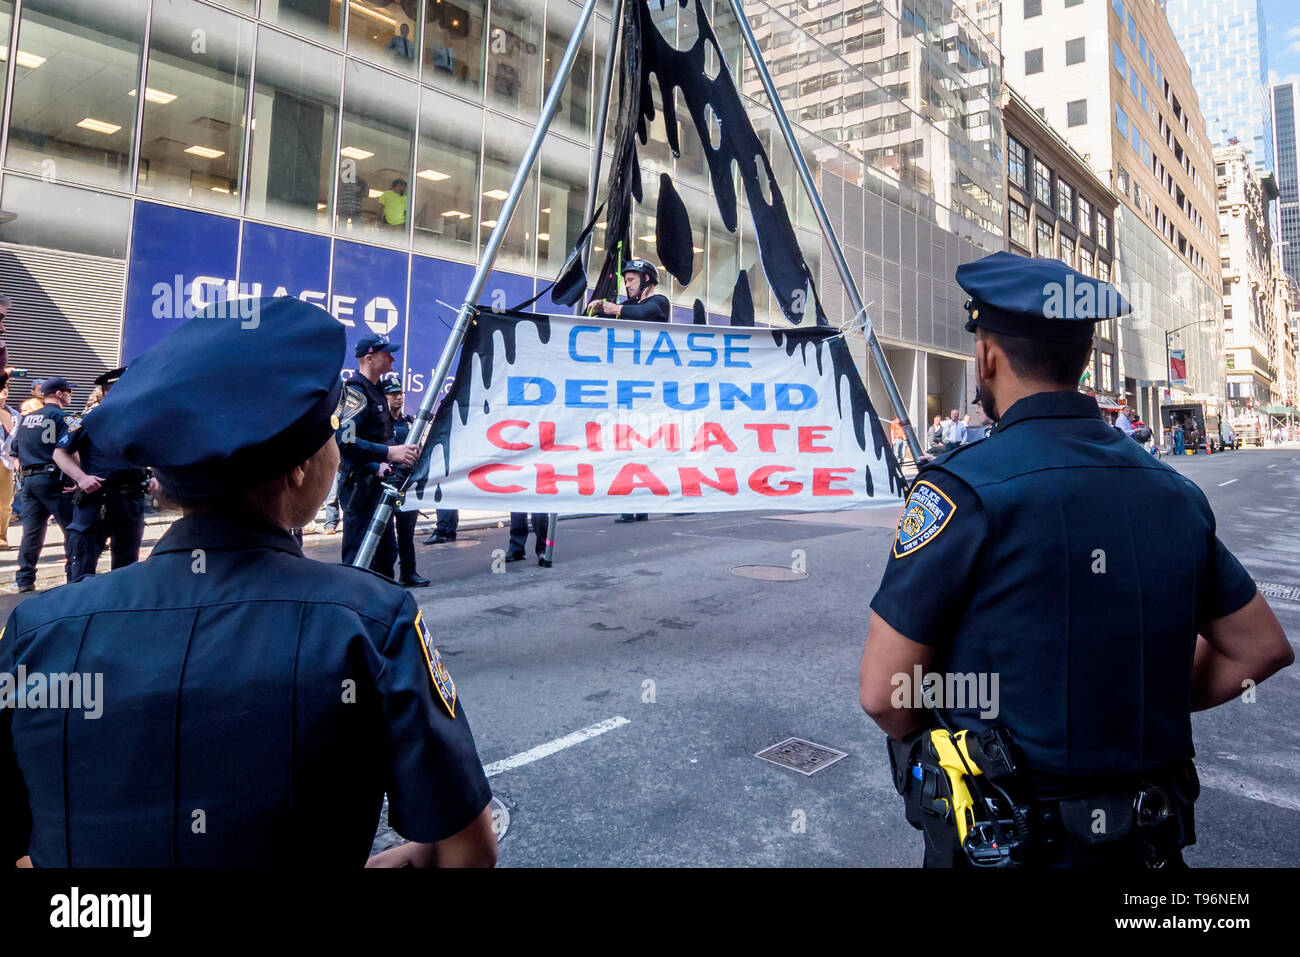 New York, United States. 16th May, 2019. Protests against Chase Bank for its role as the world's worst funder of climate change escalated as climate activists erected and scaled a two-story, steel tripod structure, blocking 47th St at Madison Ave, in front of Chase's new flagship global corporate headquarters. One arrest was while a group of supporting demonstrators chanted and displayed banners calling on Chase to end its massive funding of fossil fuels. Credit: Erik McGregor/Pacific Press/Alamy Live News Stock Photo